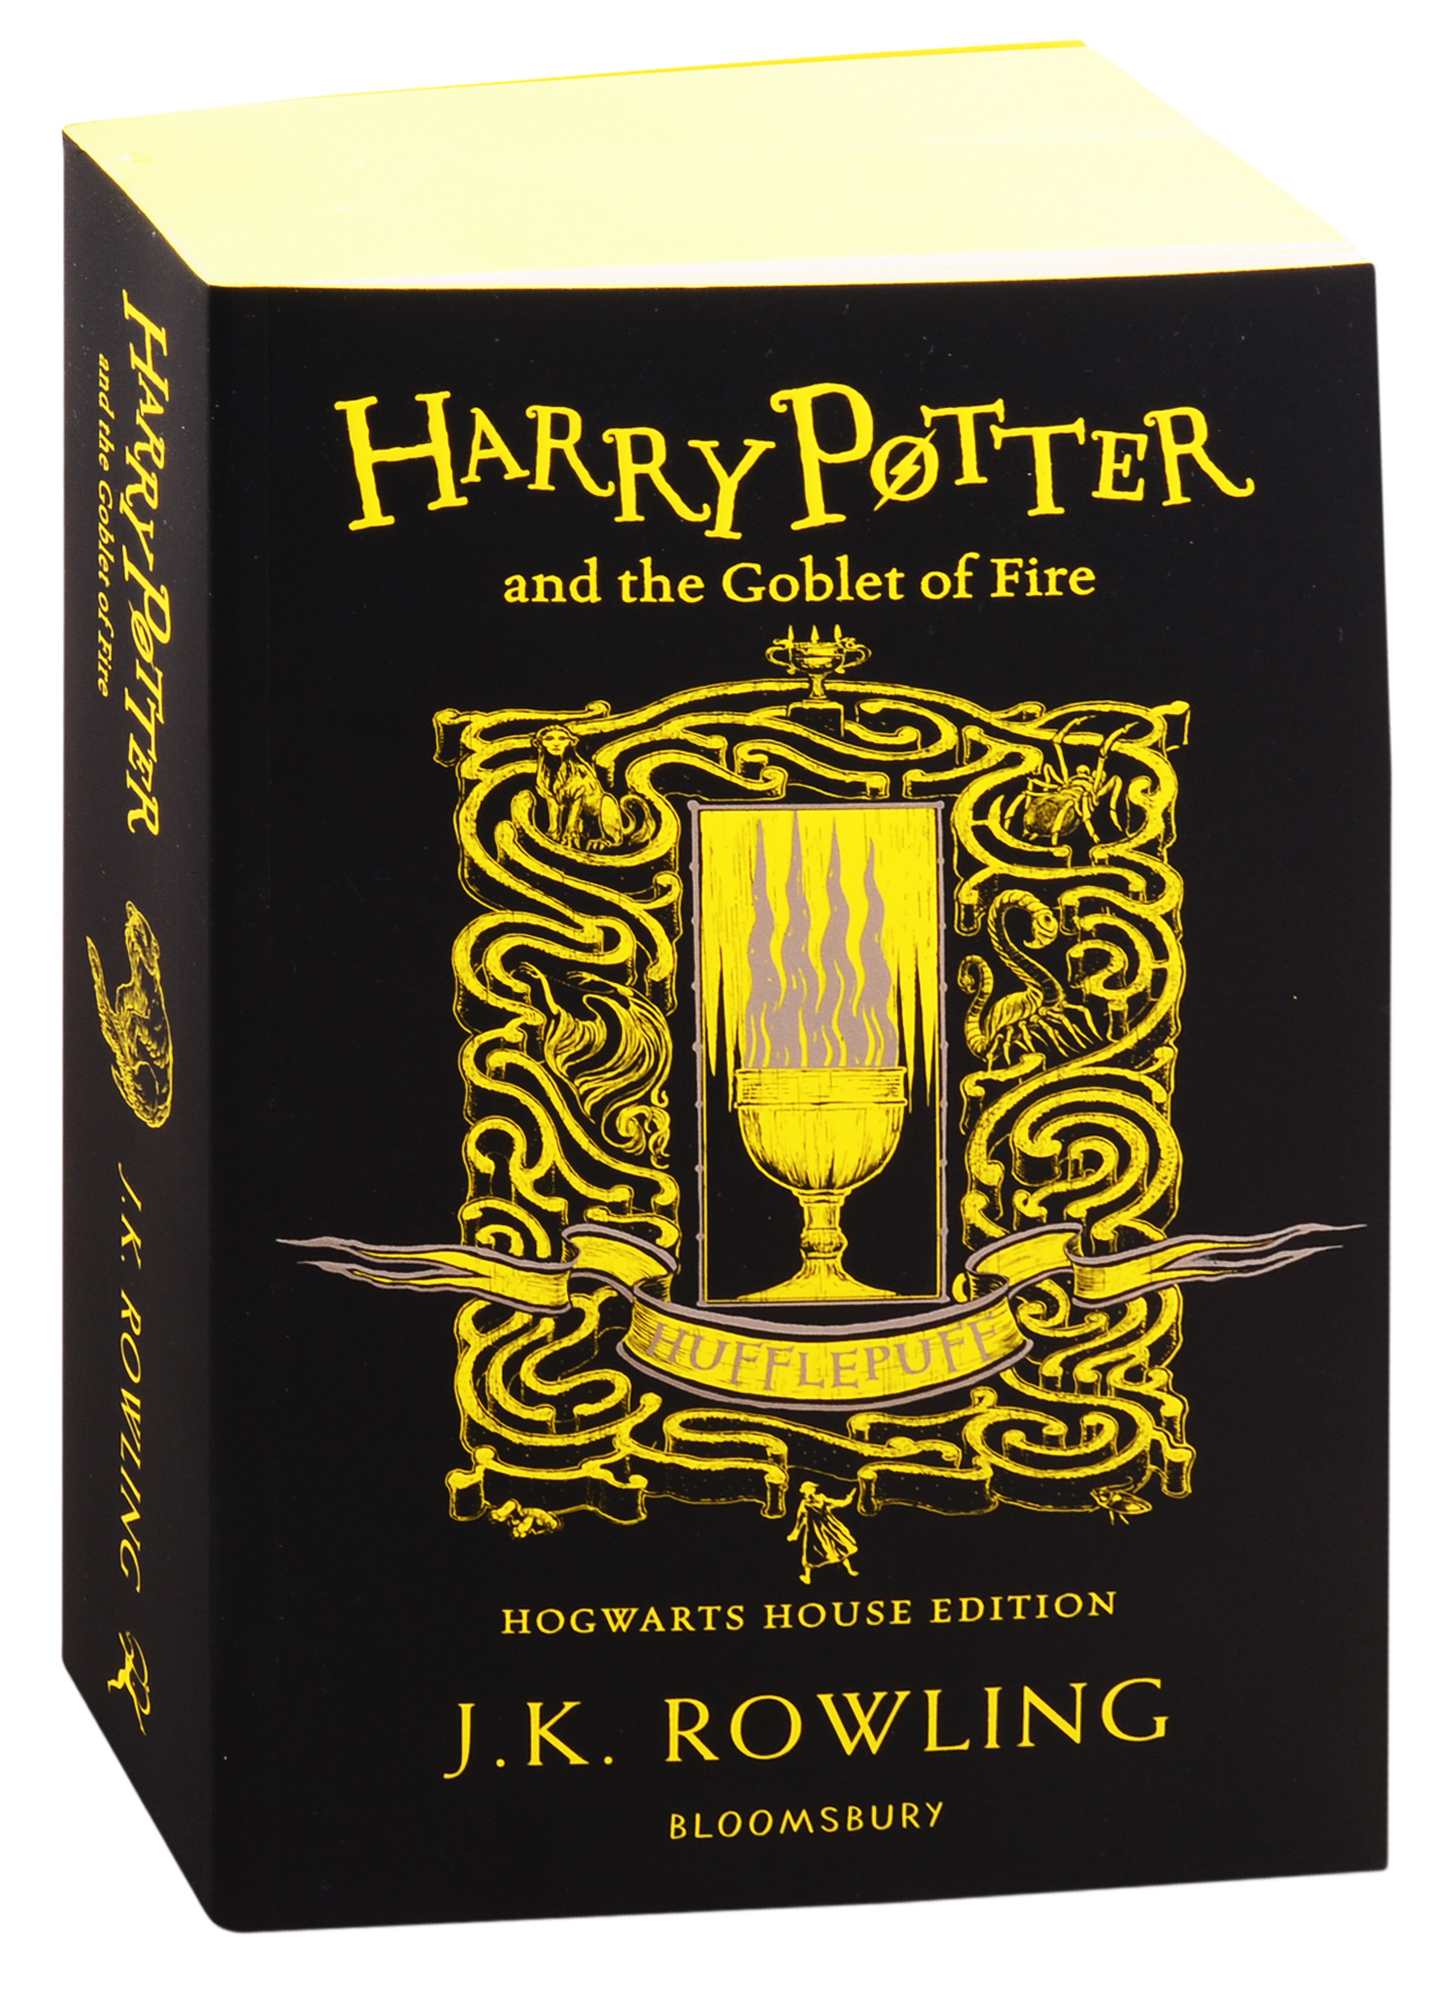 harry potter and the goblet of fire enchanted postcard book Роулинг Джоан Кэтлин Harry Potter and the Goblet of Fire Hufflepuff